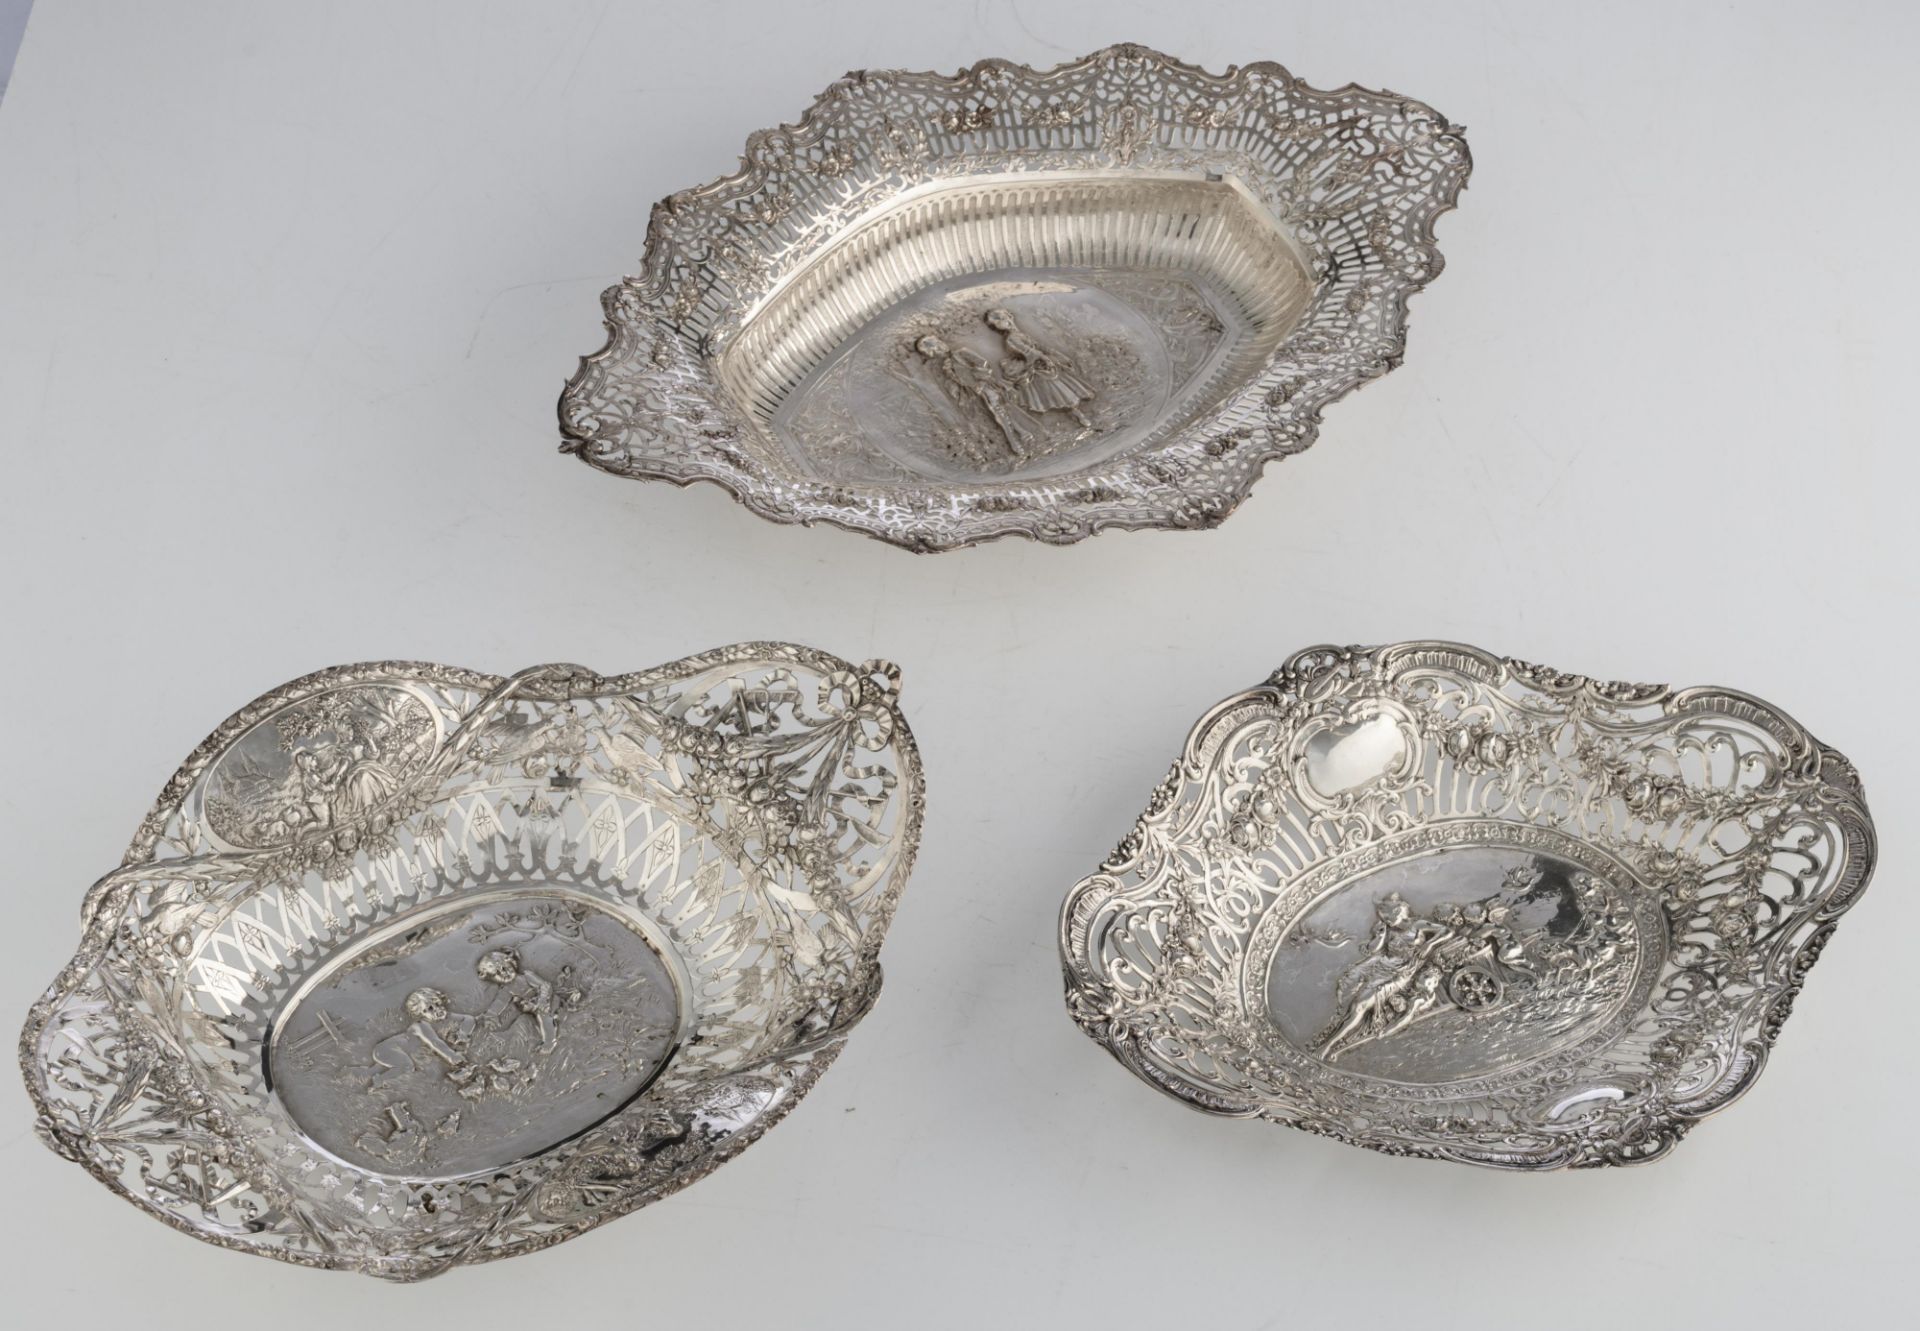 A collection of three silver chargers with ornate repousse pierced work, the well depicting playing - Bild 8 aus 12